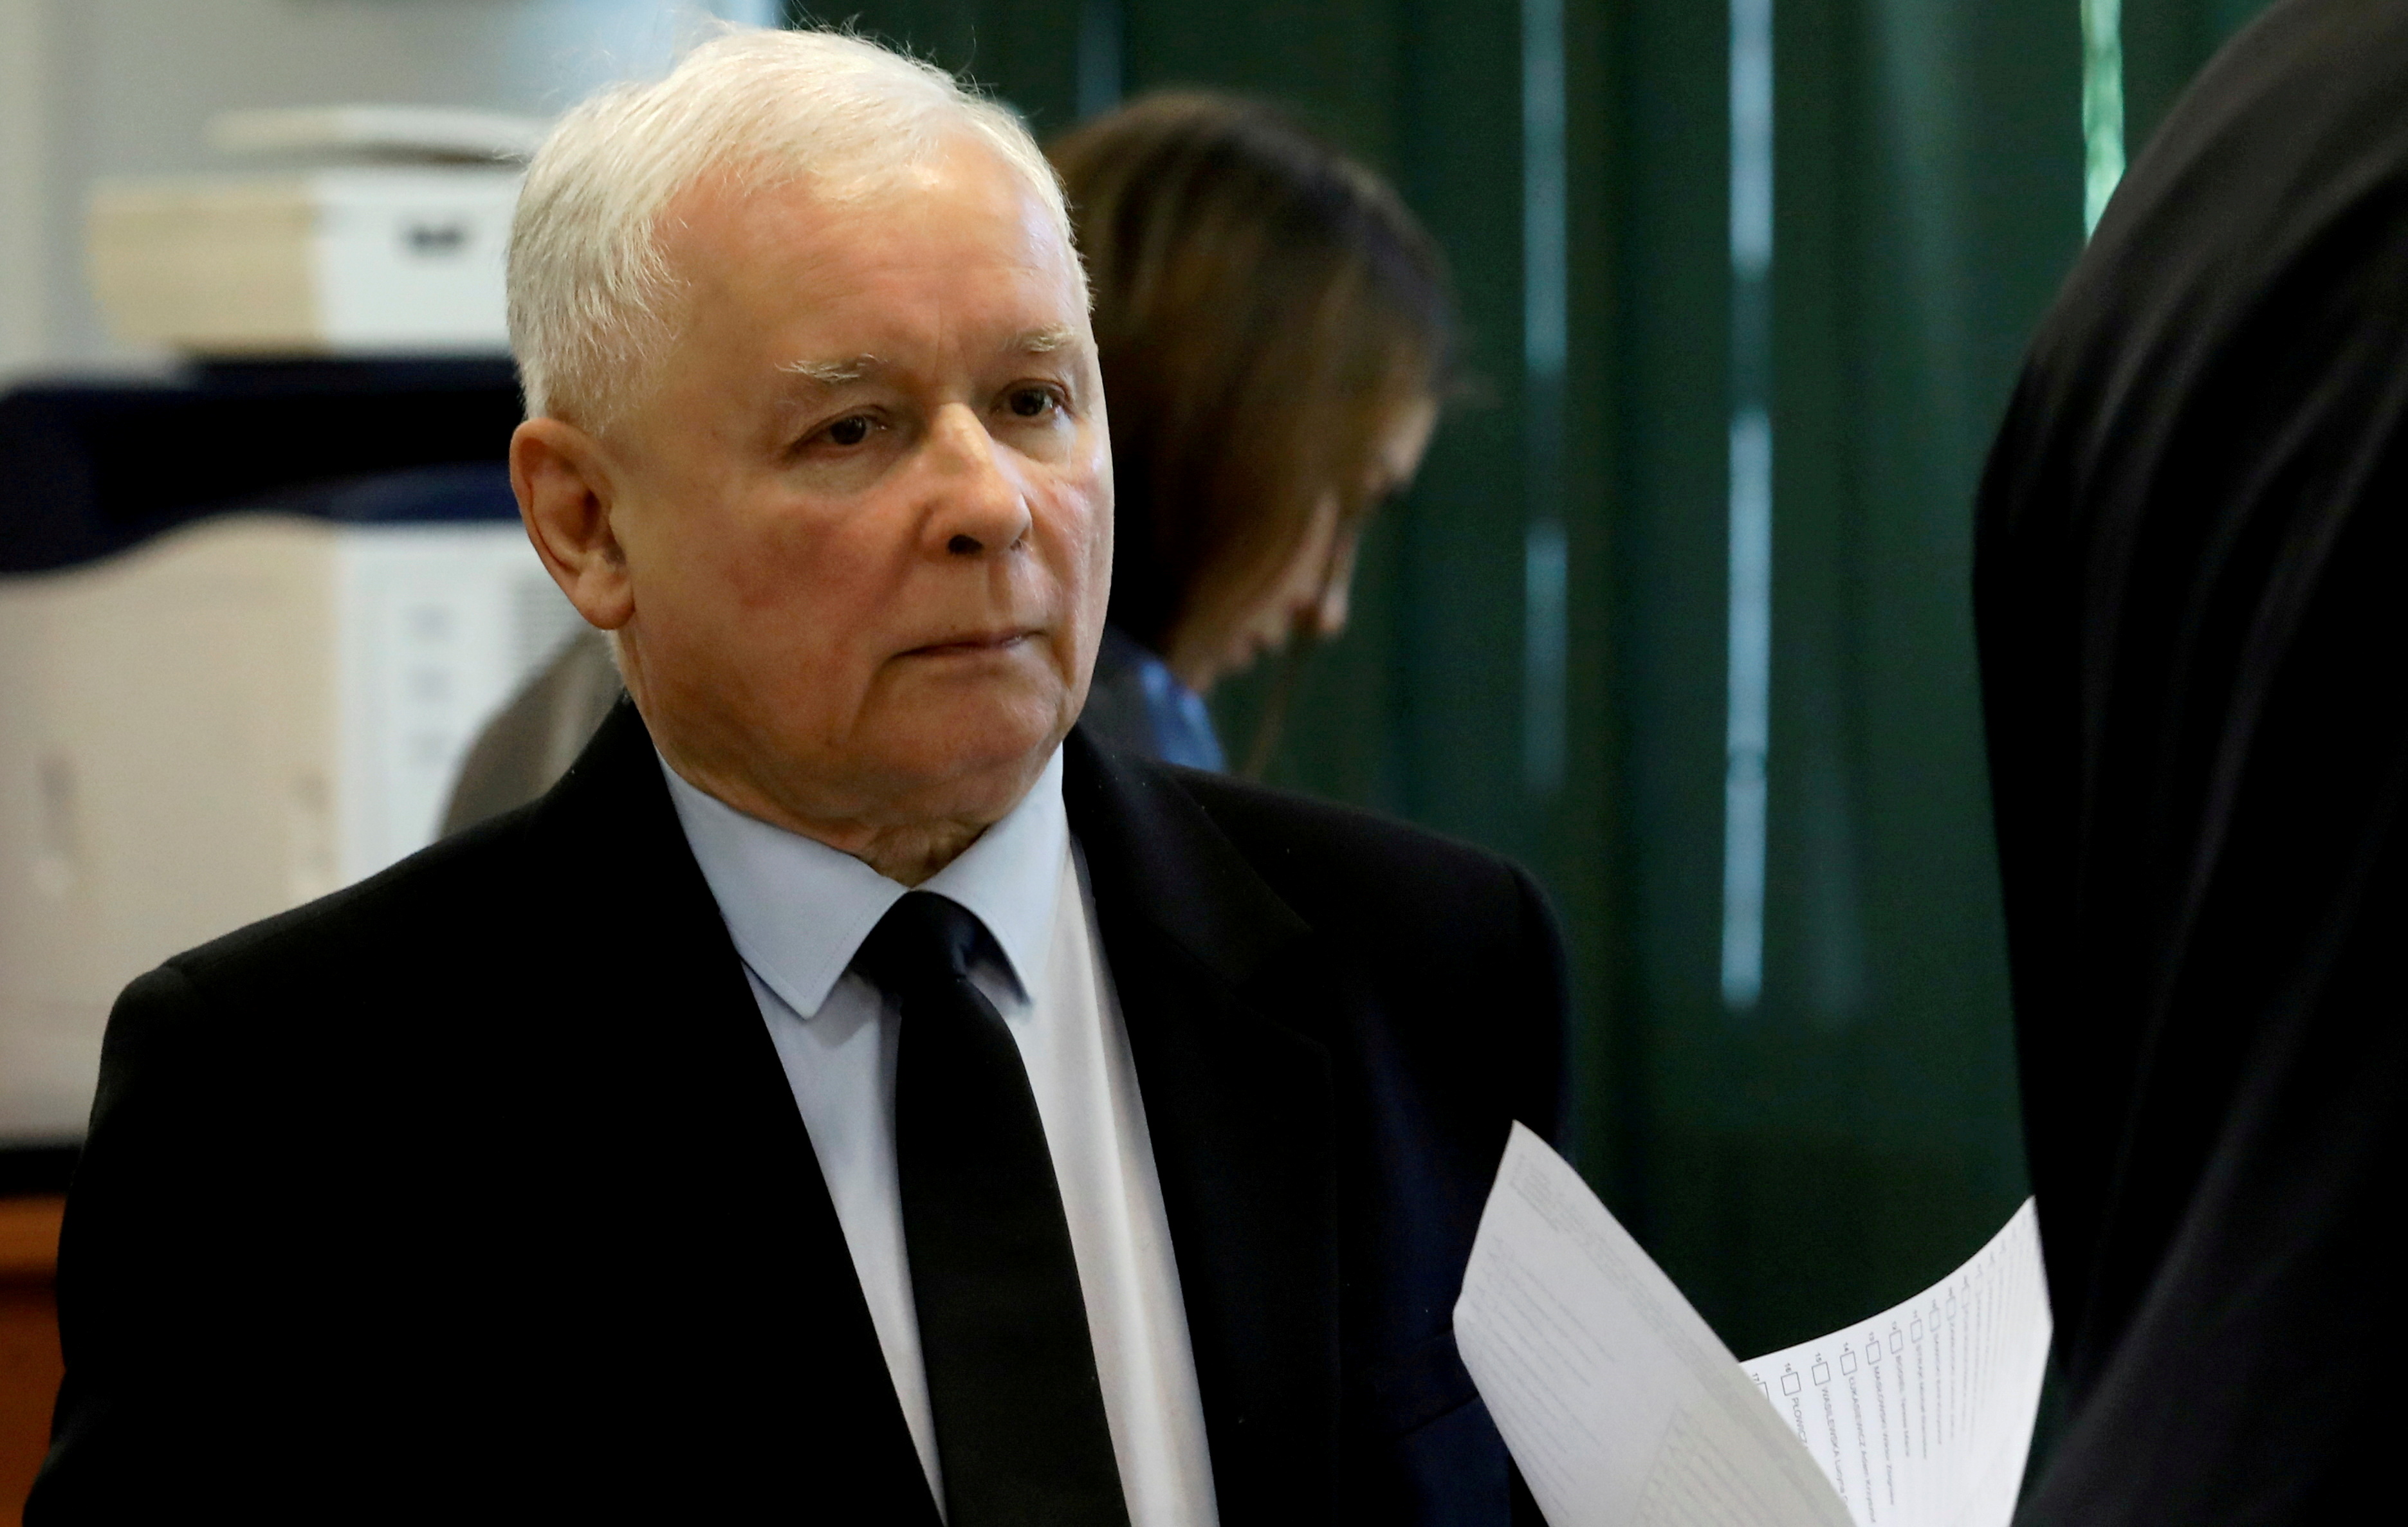 Jaroslaw Kaczynski, leader of the ruling Law and Justice (PiS) party, attends a vote during parliamentary elections at a polling station in Warsaw,